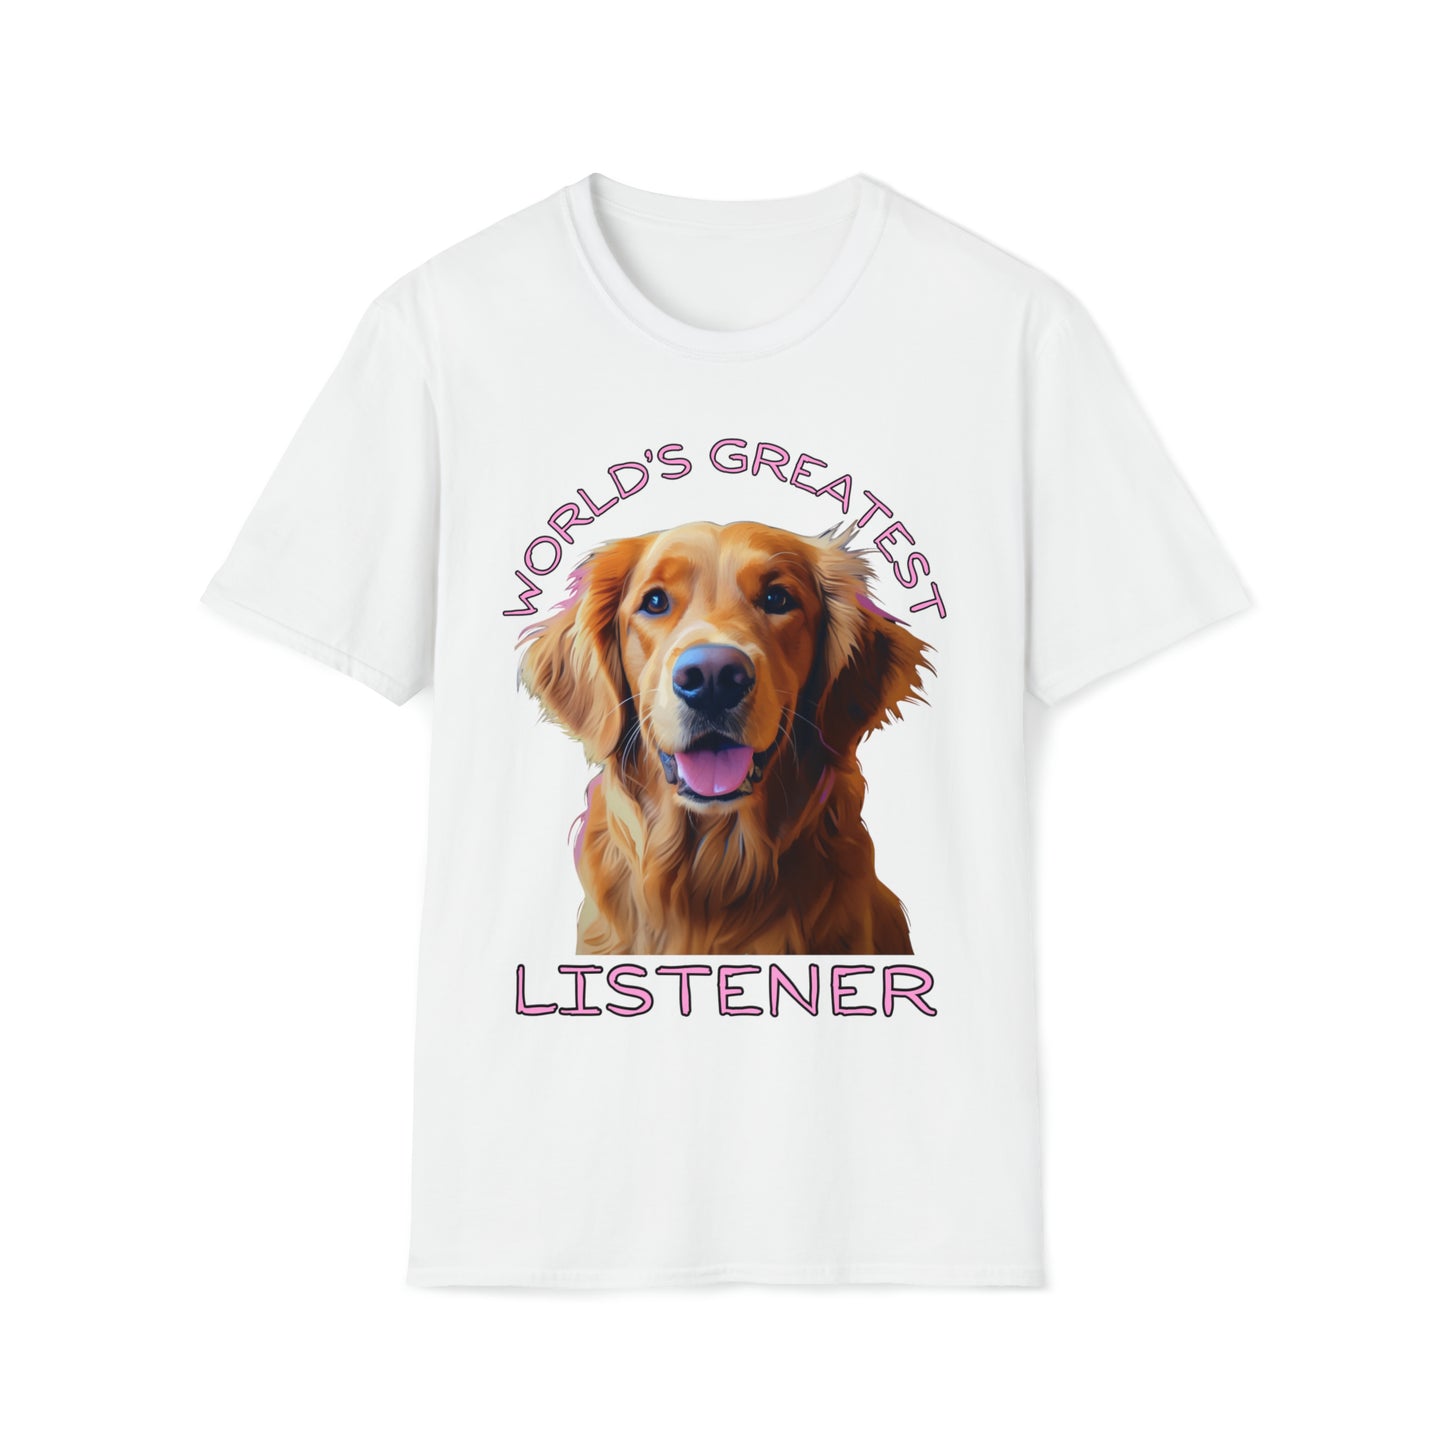 "World's Greatest Listener" (pink text) Unisex Softstyle T-Shirt